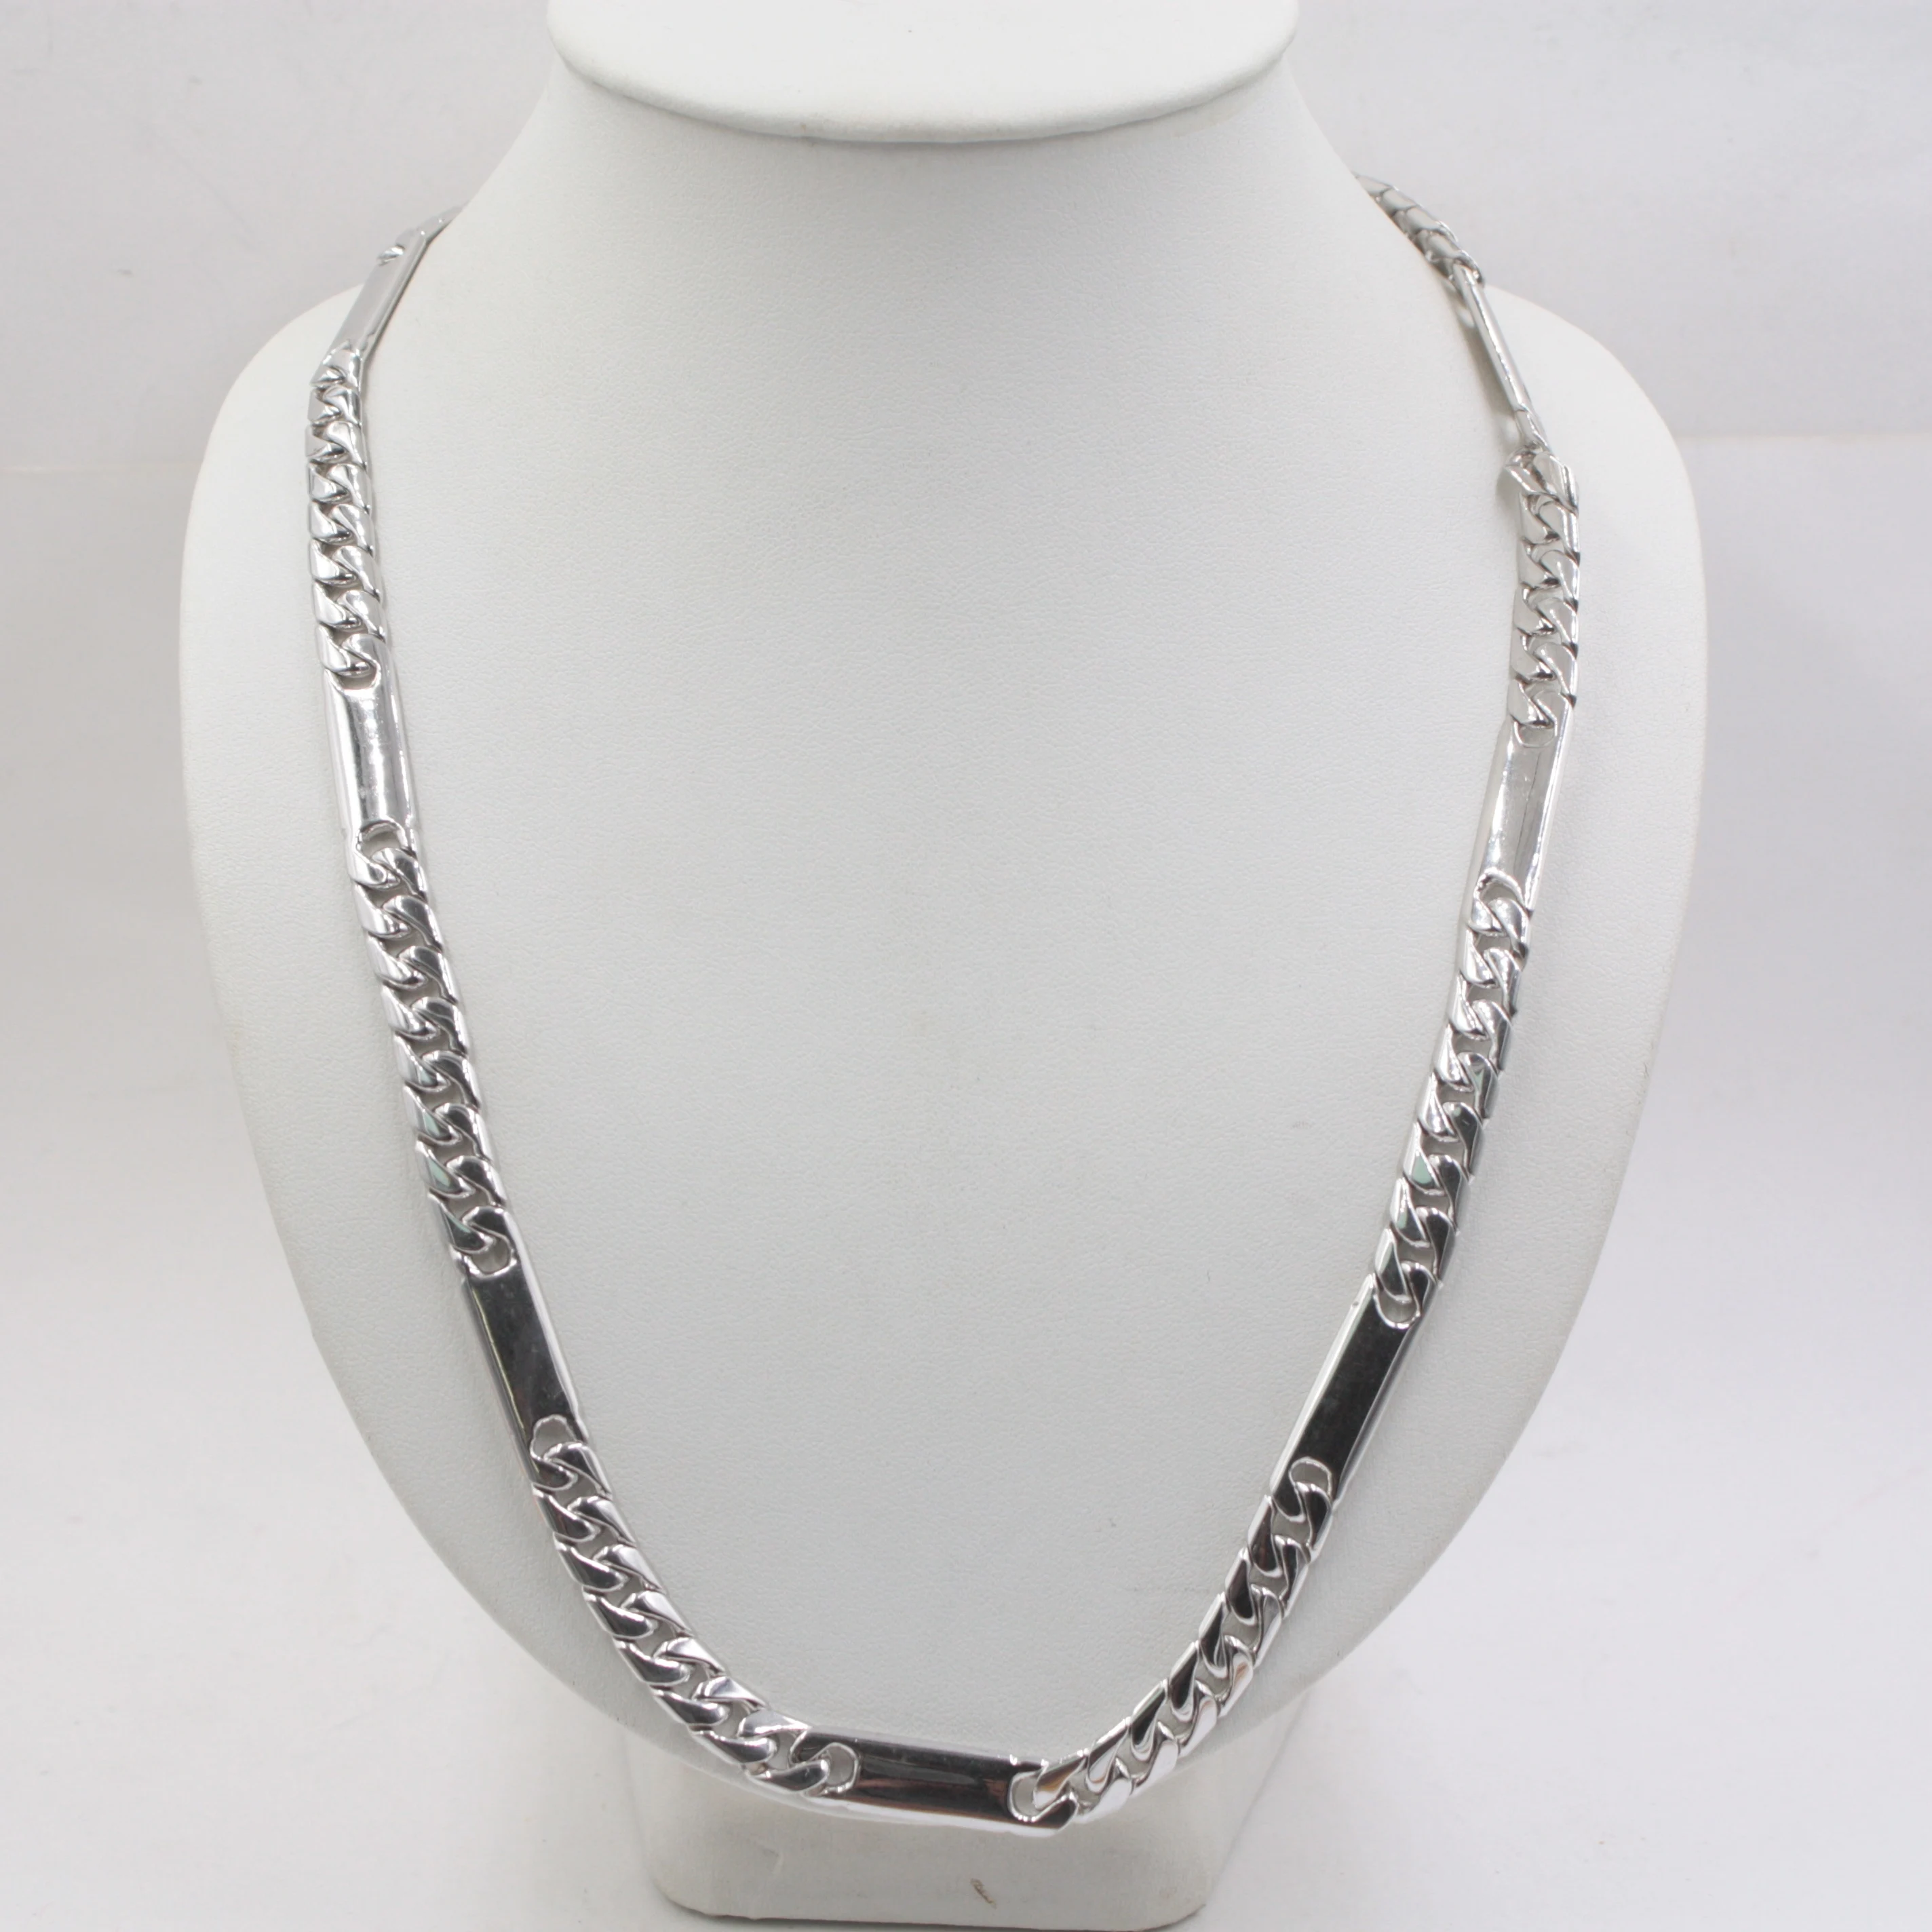 Fine S925 Silver Necklace Man &Woman's Elegant Cable Link Rectangle Chain New 